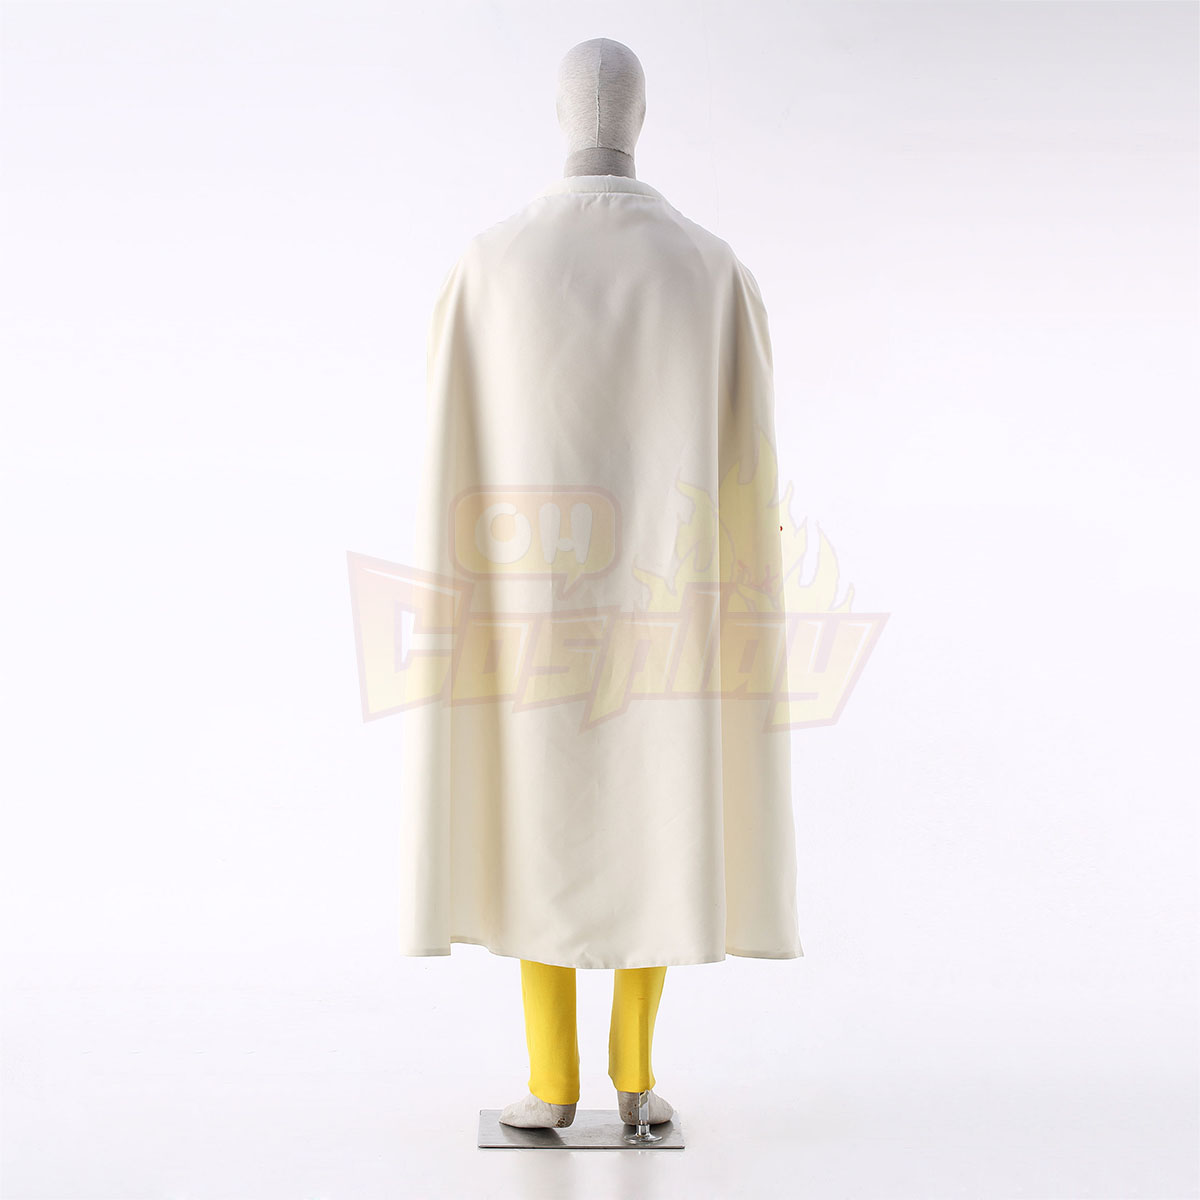 One Punch-man Saitama 1ST Cosplay Costumes Deluxe Edition